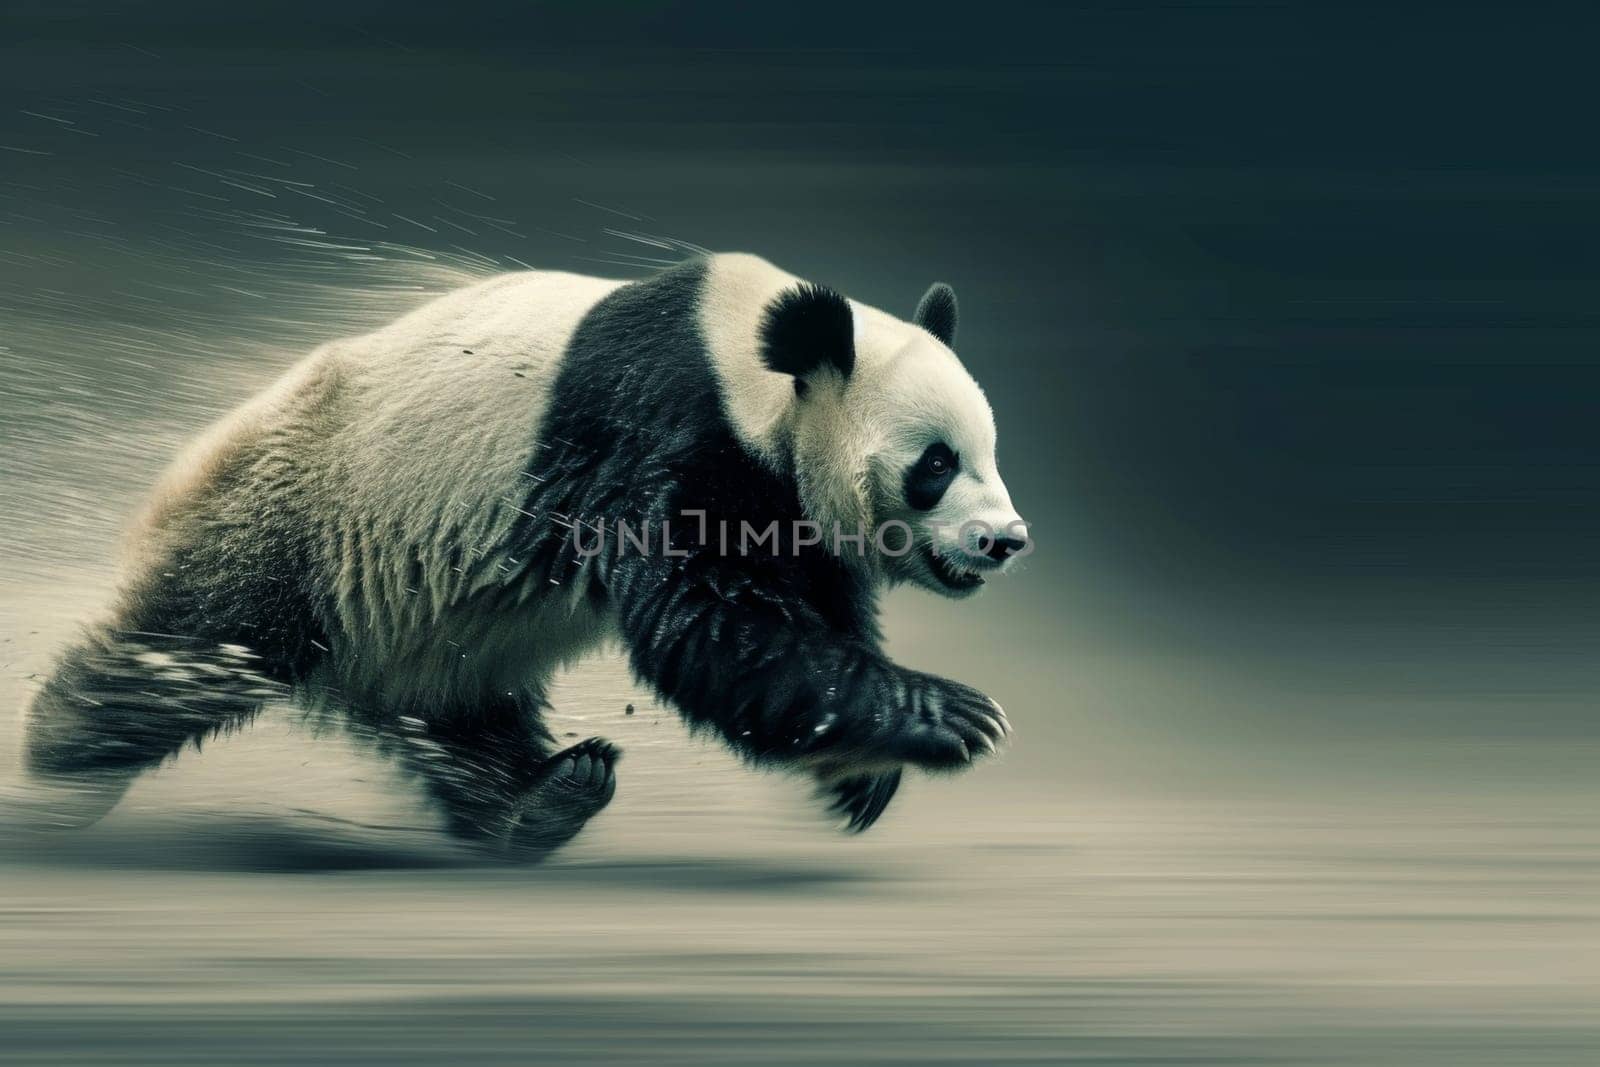 The giant panda is running fast. 3d illustration by Lobachad